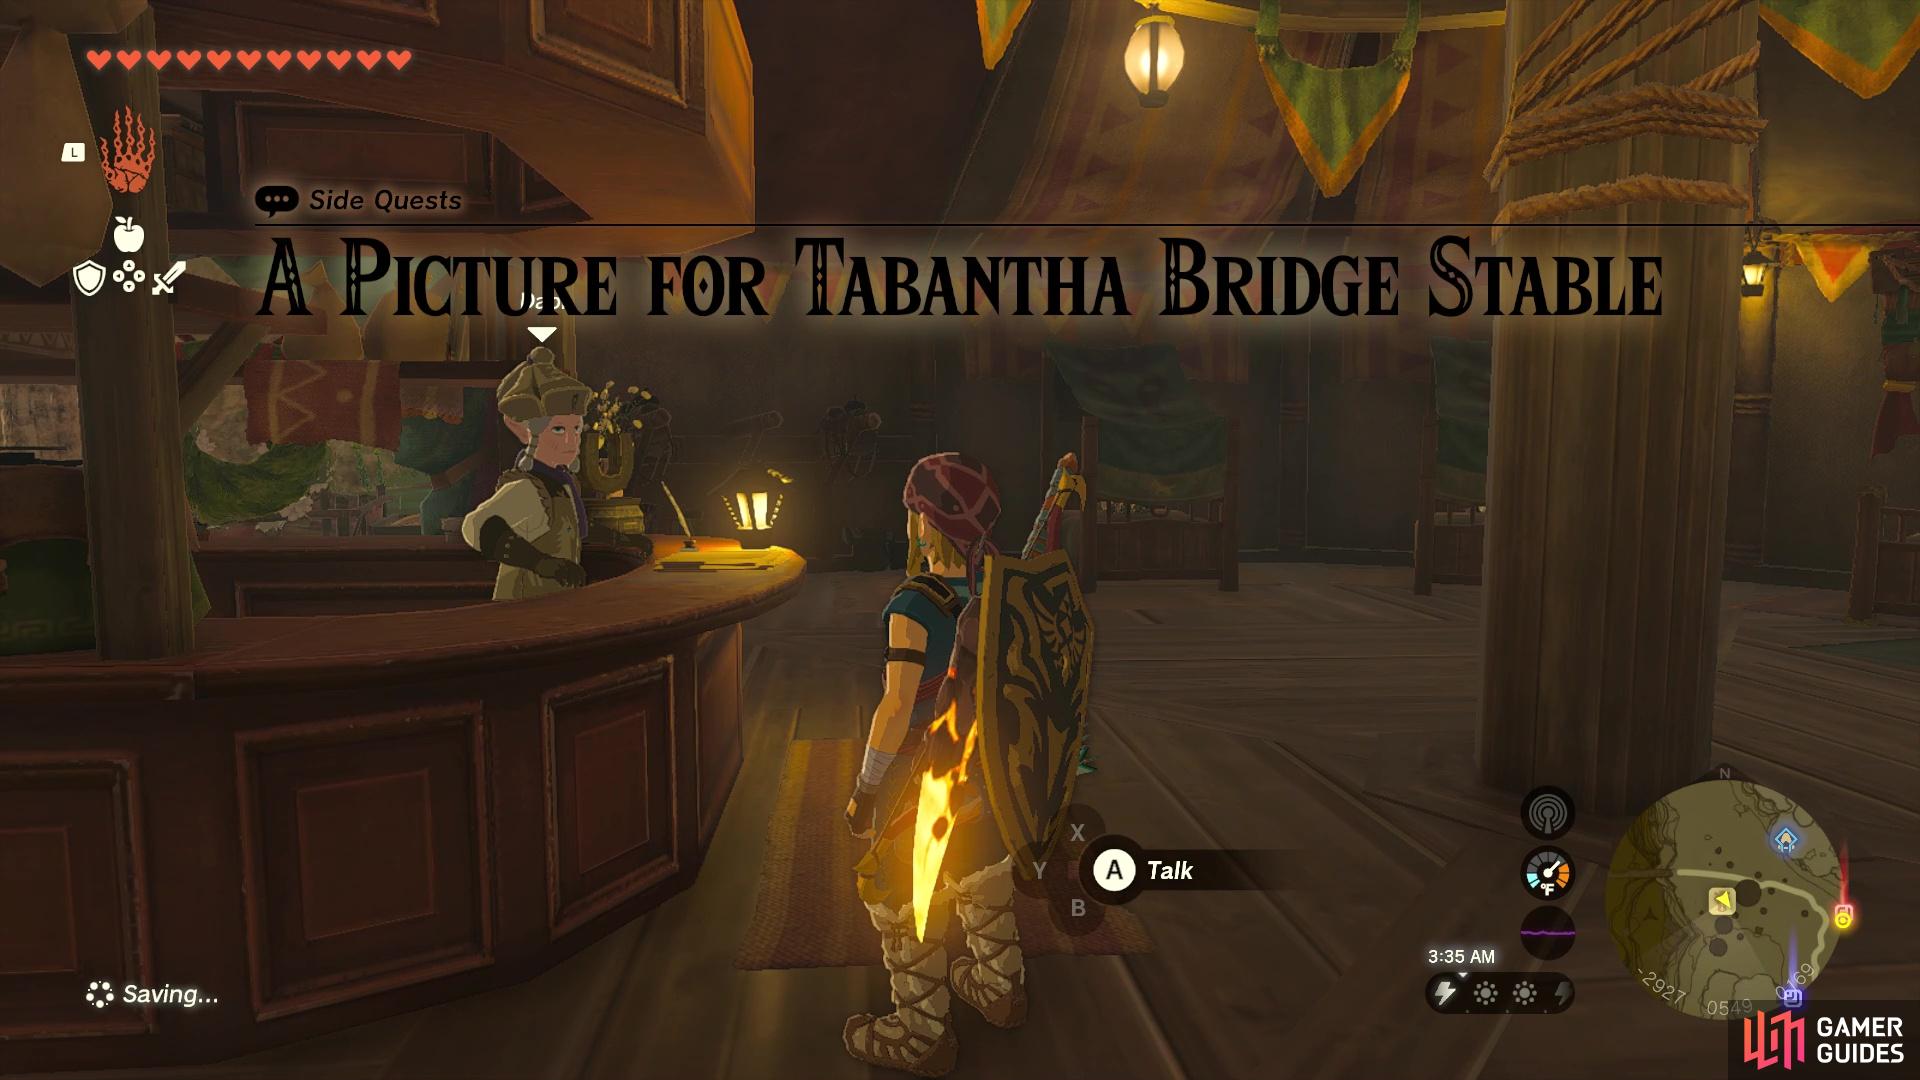 Head to the Tabantha Bridge Stable for this side quest.